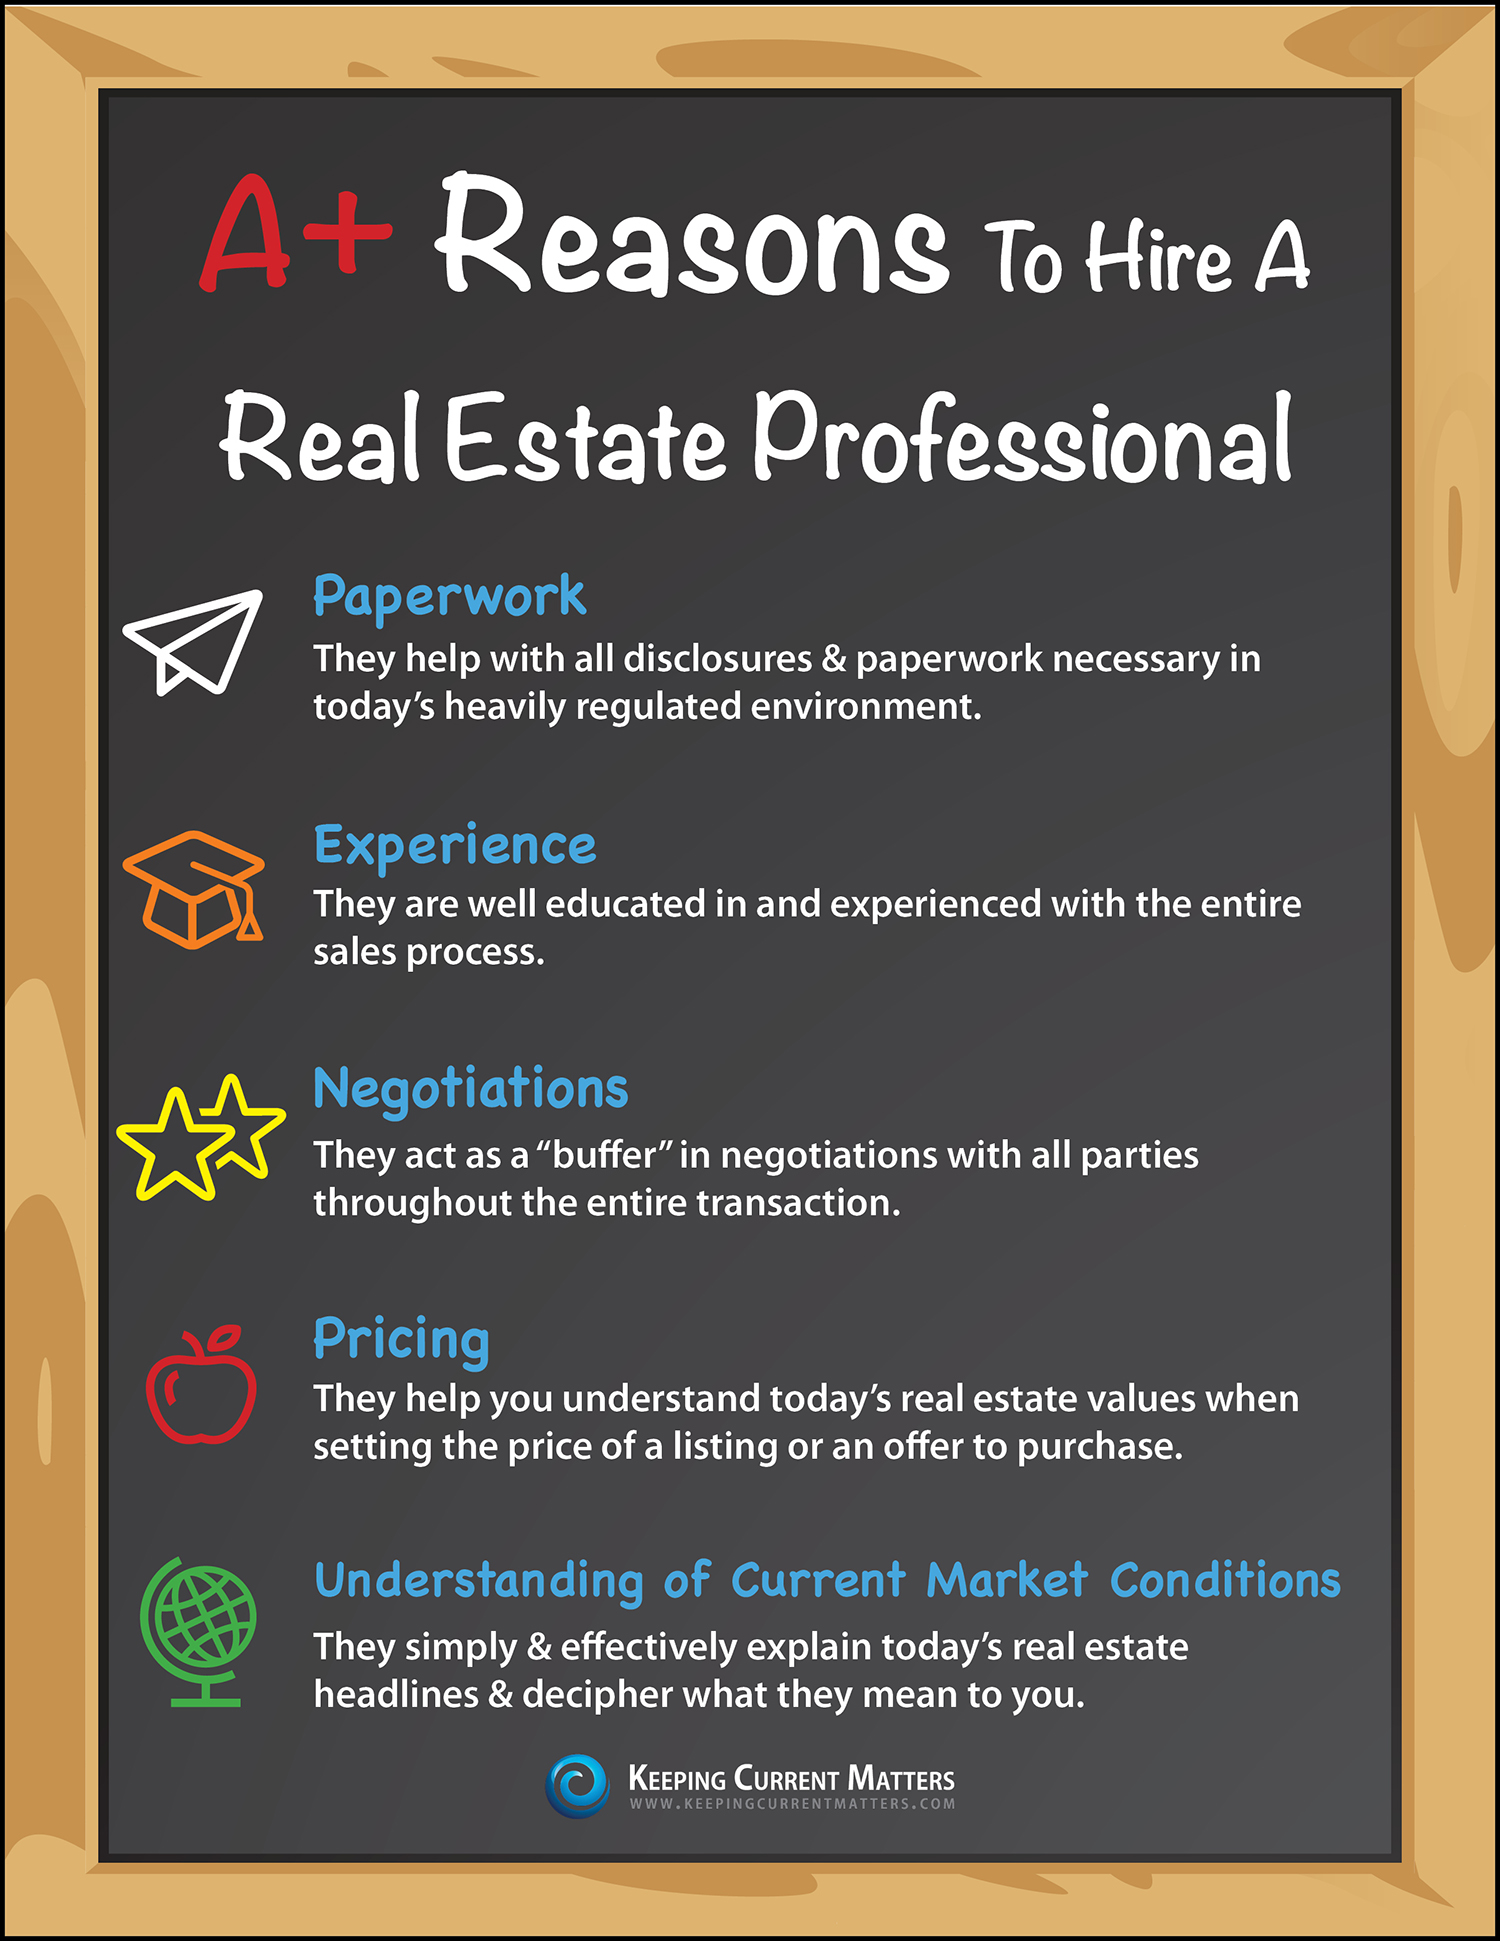 A+ Reasons To Hire A Real Estate Professional [INFOGRAPHIC] | Keeping Current Matters